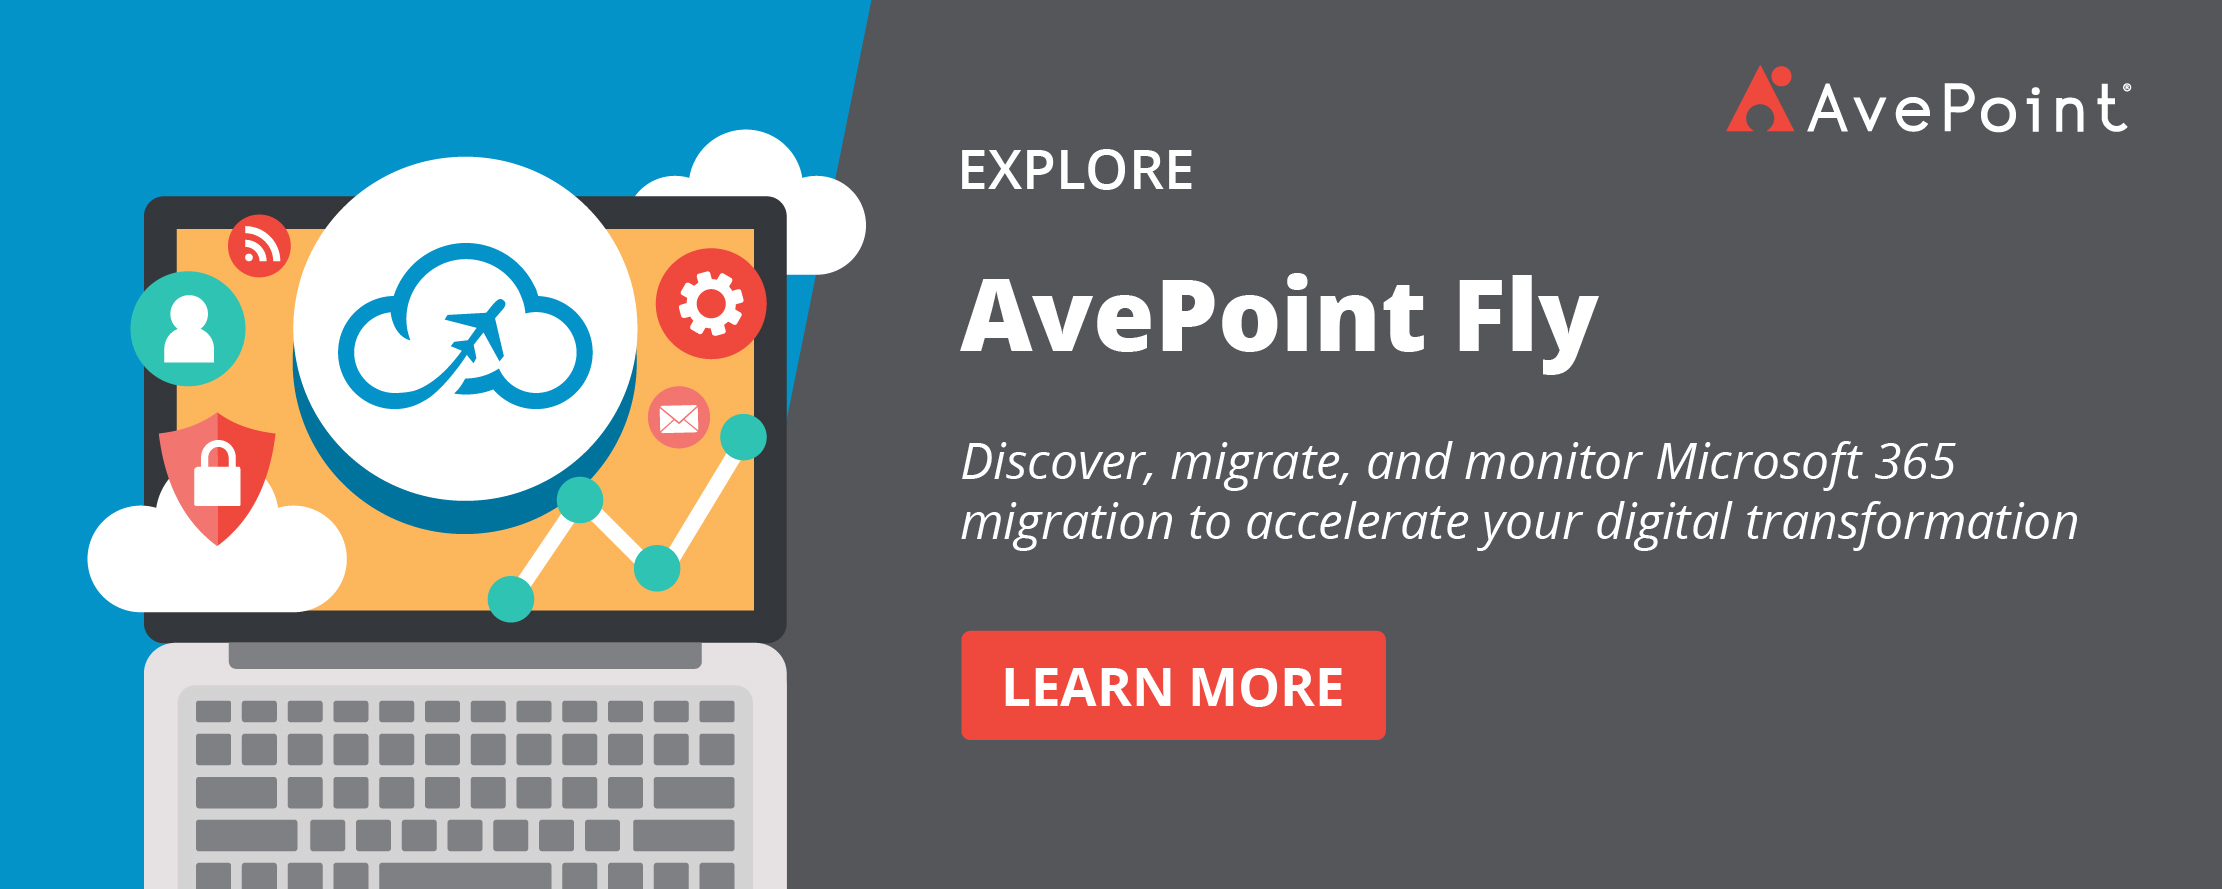 avepoint-fly-cloud-migration